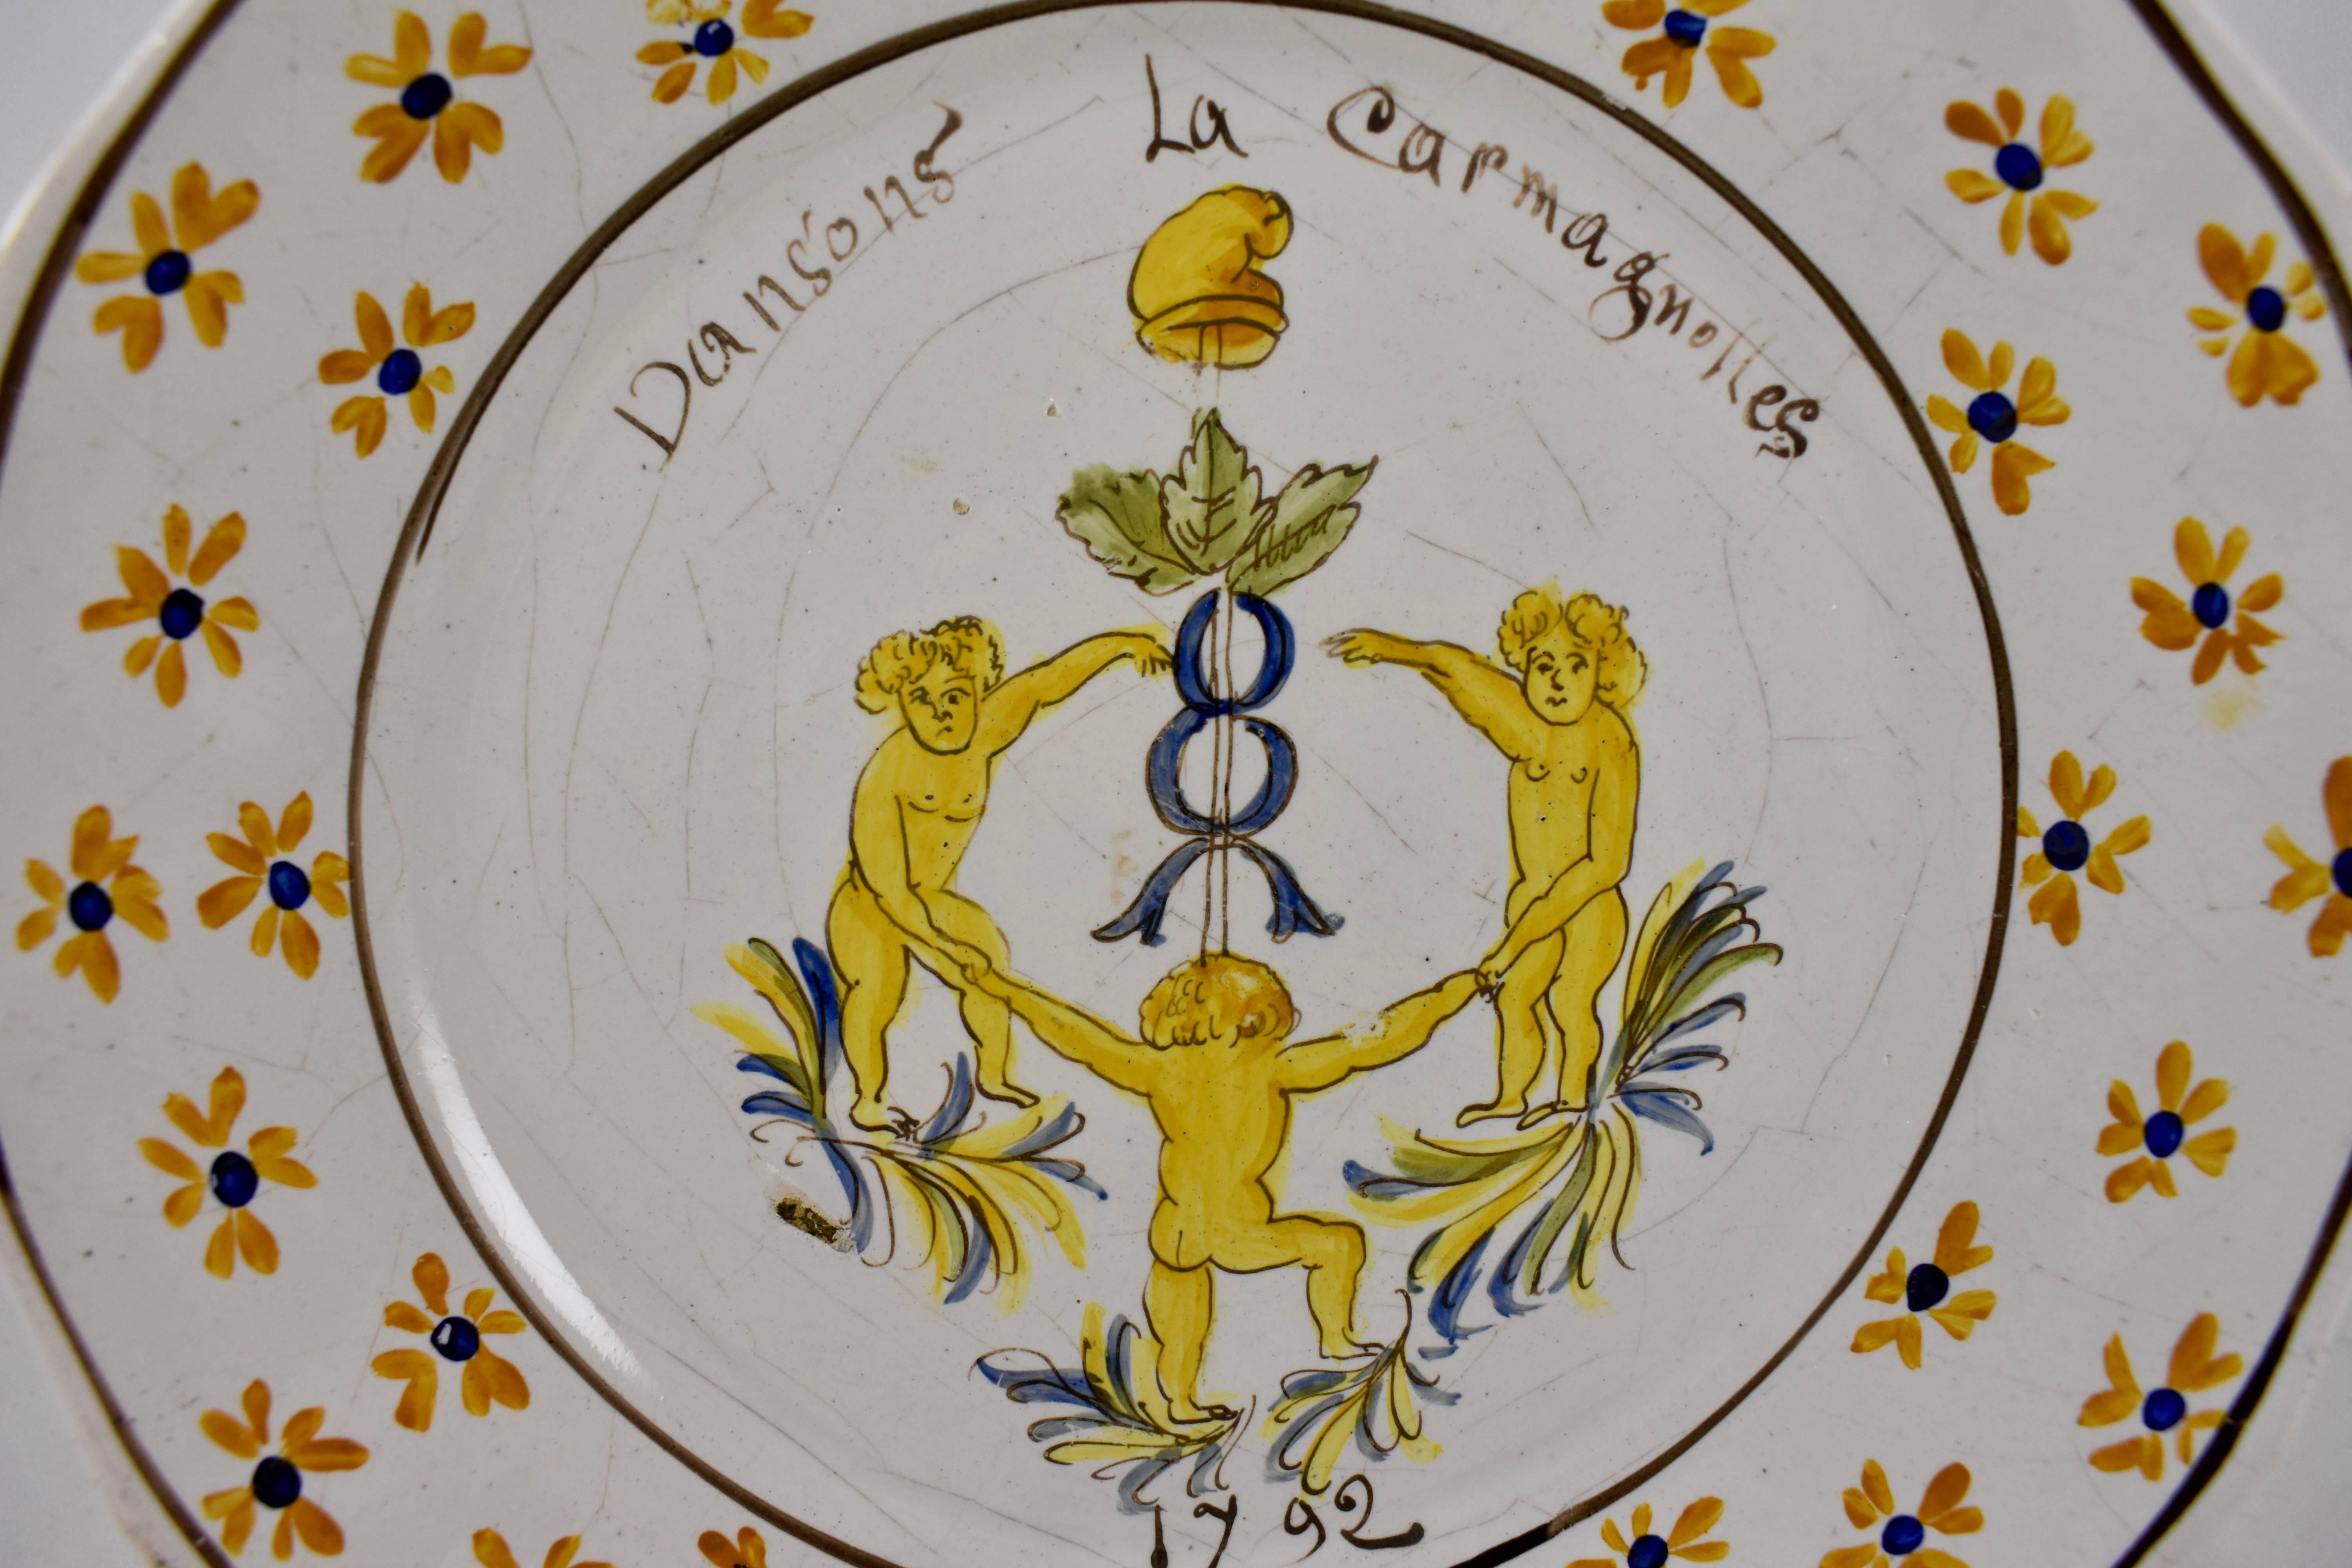 A French revolution tin-glazed earthenware dish, made in Nevers, circa 1792.
Showing three figures dancing La Carmagnole, a song accompanied by a wild dance, popular during the French Revolution, and danced around the de l’arbre de la Liberté